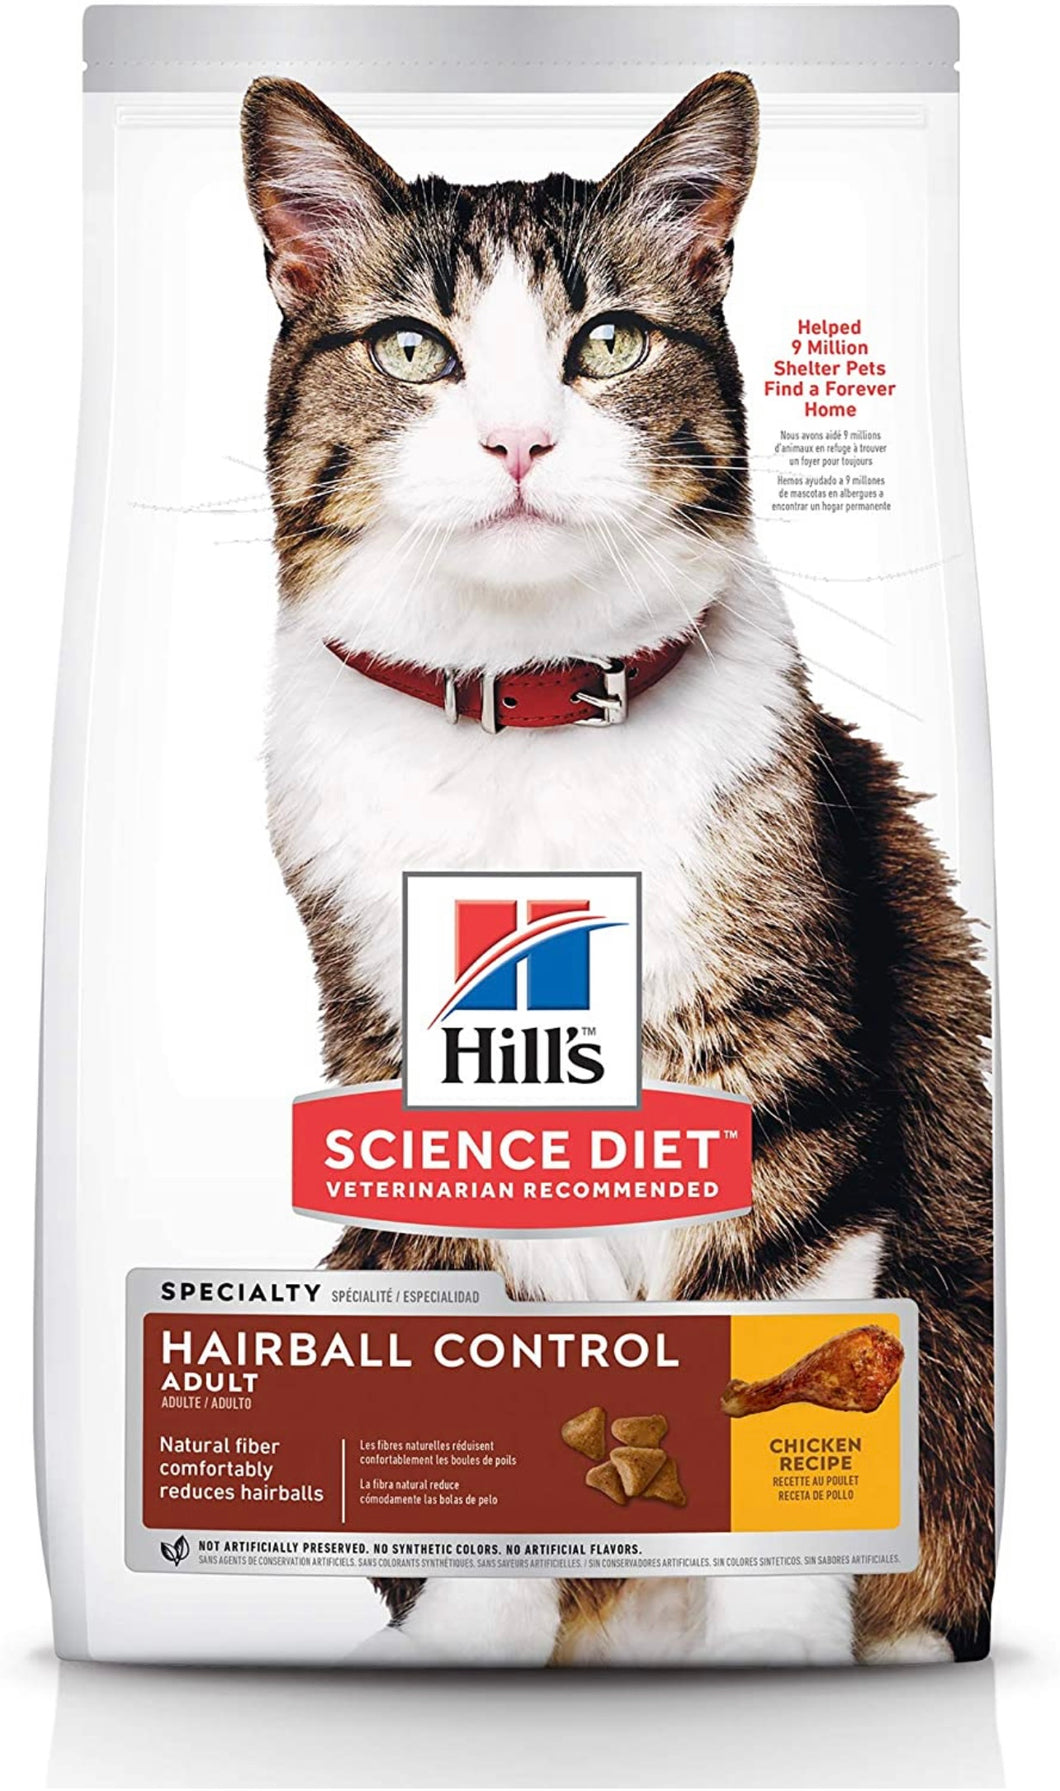 Hill’s science chicken recipe diet hairball control dry dog food 4KG